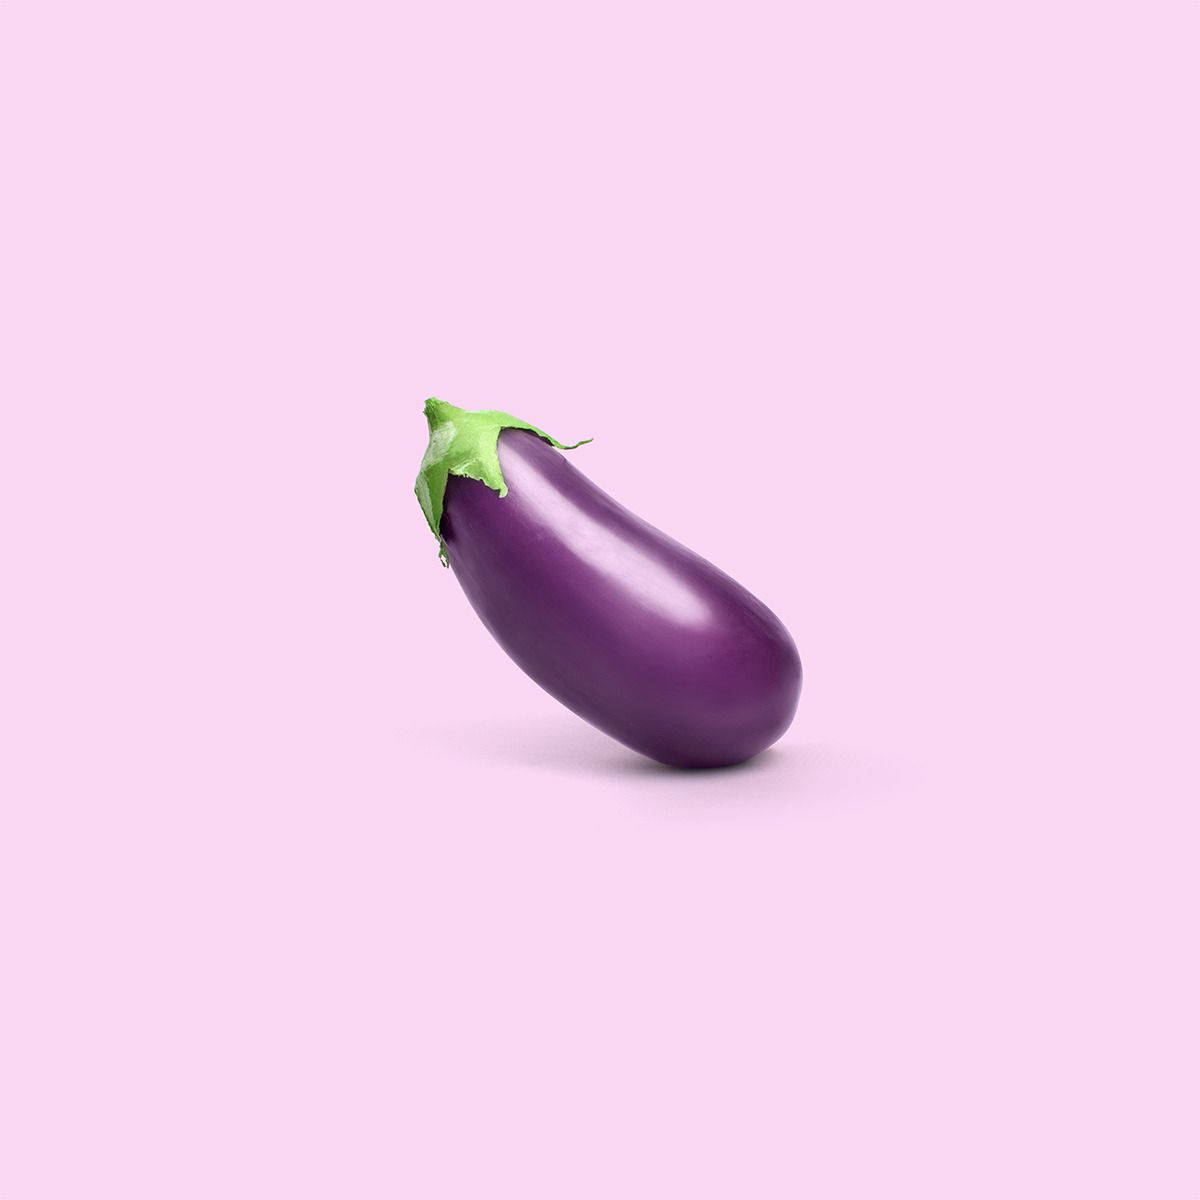 Top 999+ Eggplant Wallpaper Full HD, 4K✅Free to Use